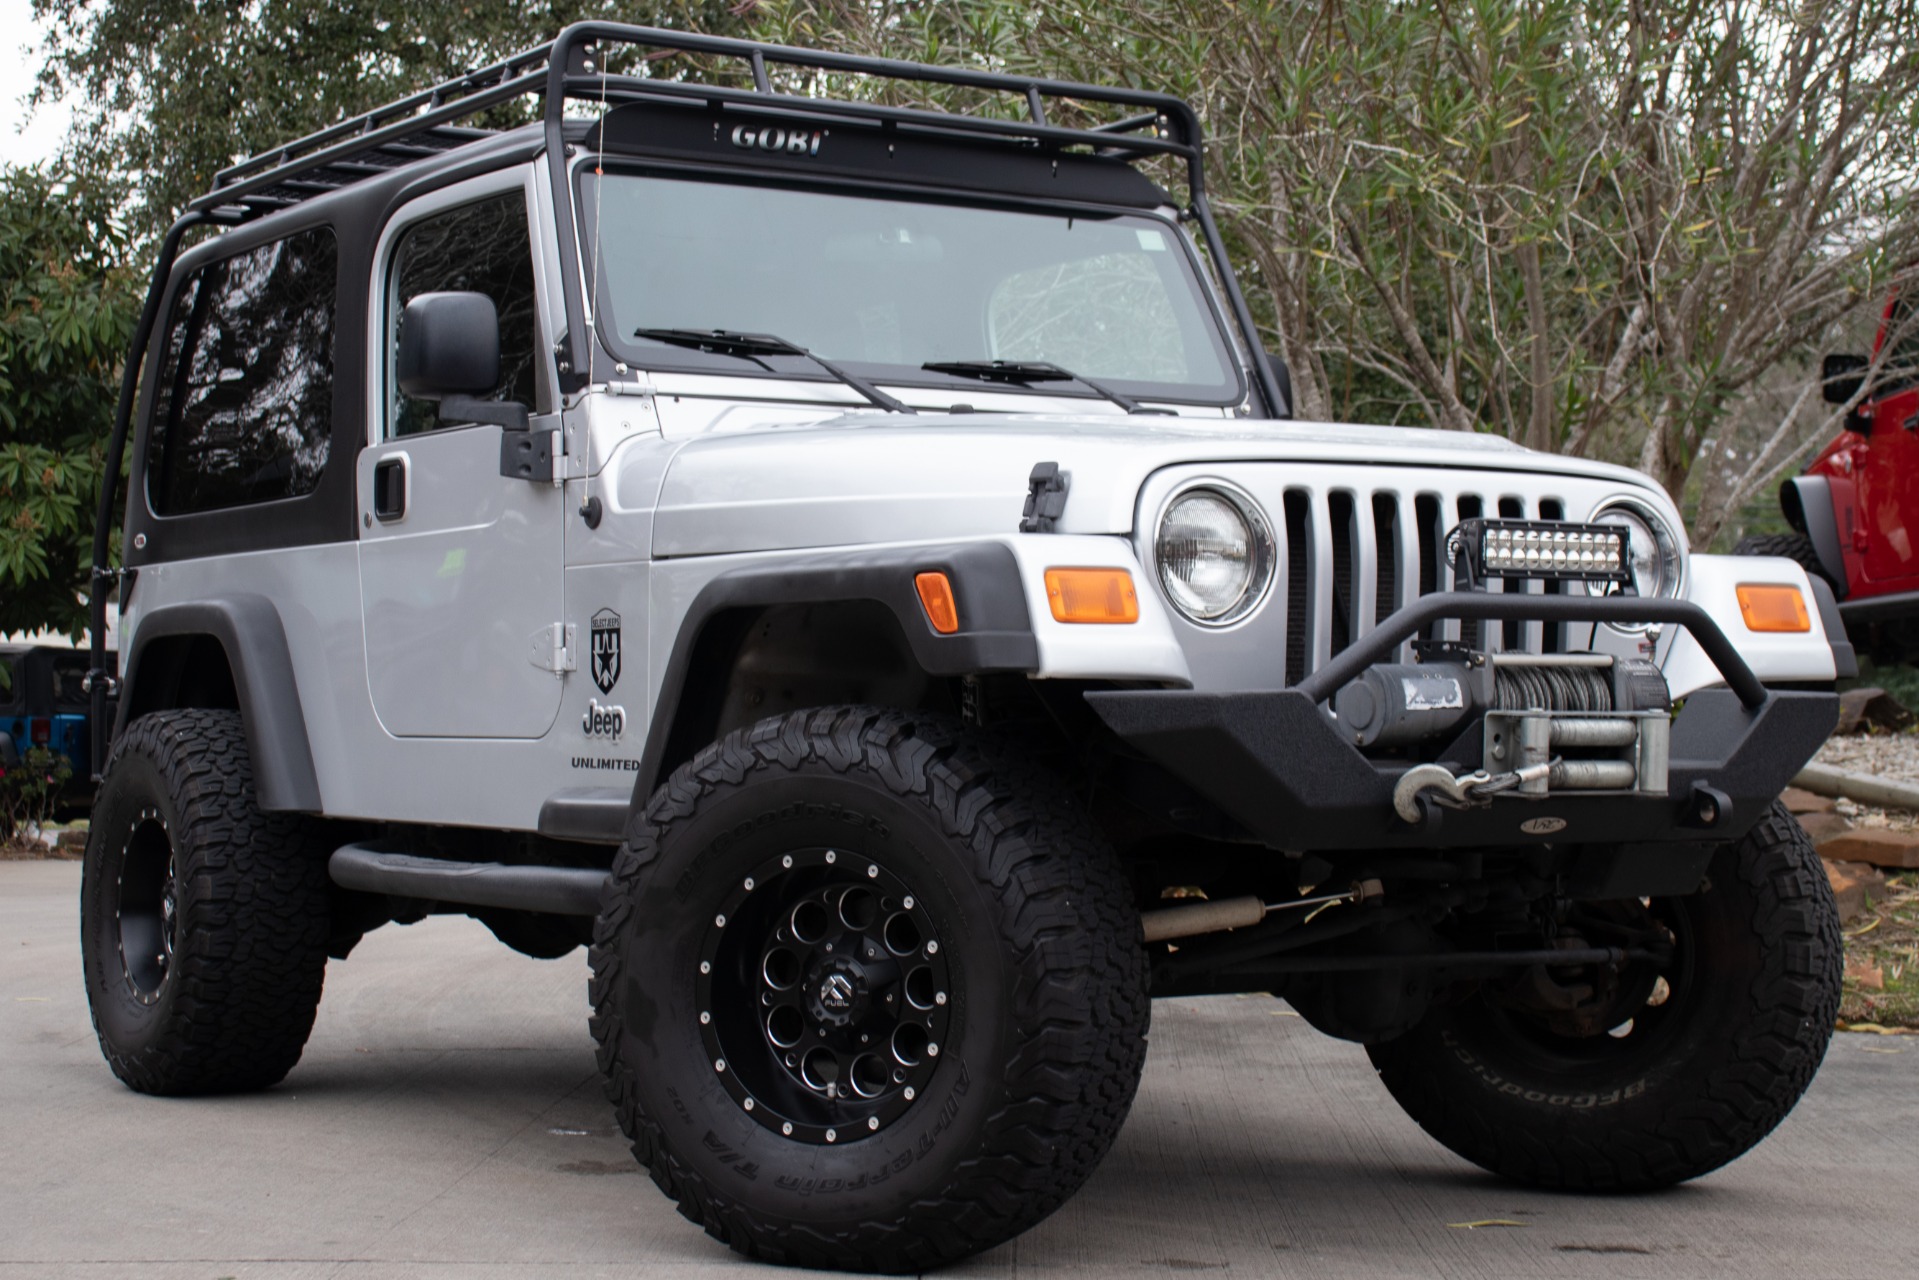 Used 2004 Jeep Wrangler Unlimited For Sale ($21,995) | Select Jeeps Inc.  Stock #759456